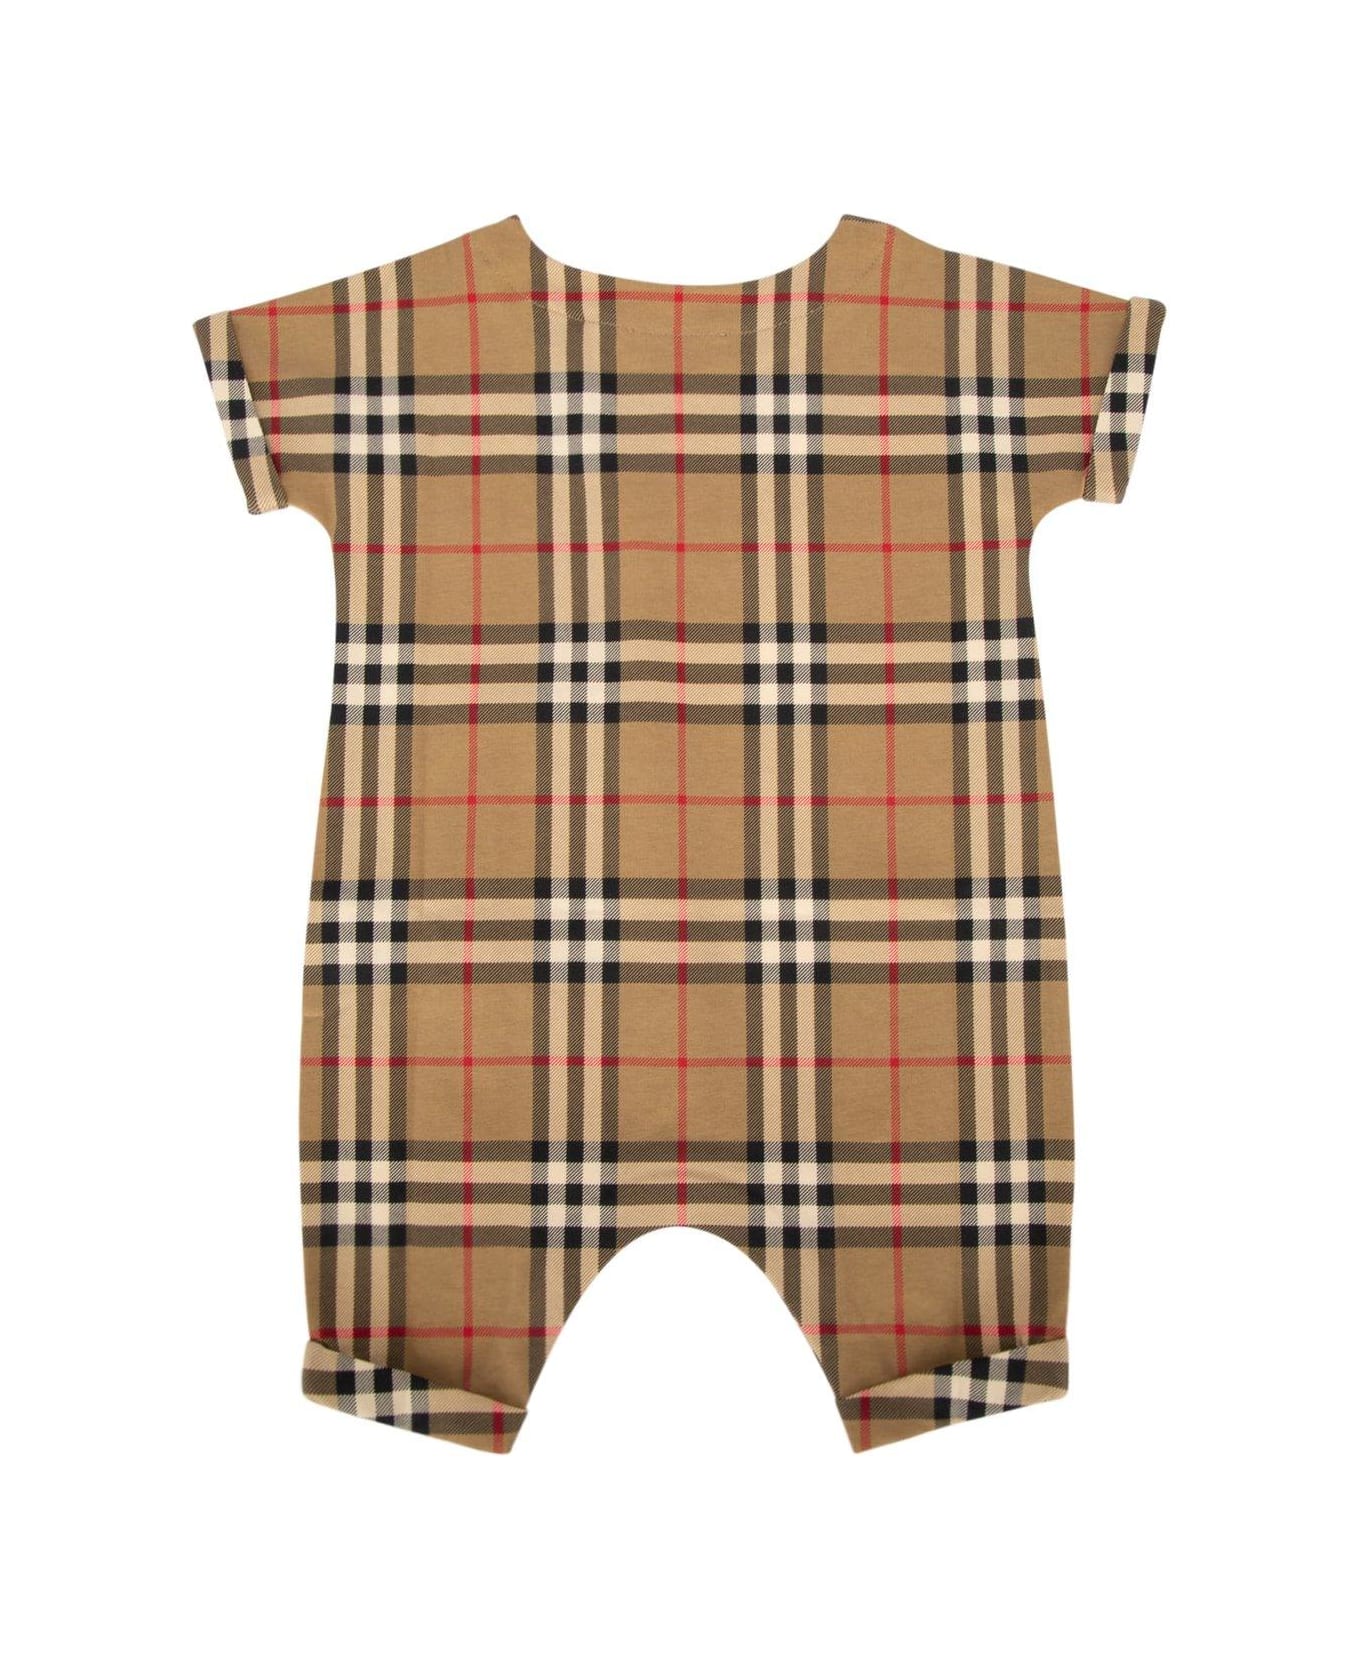 Burberry Checked Babygrow - Archive beige ip chk